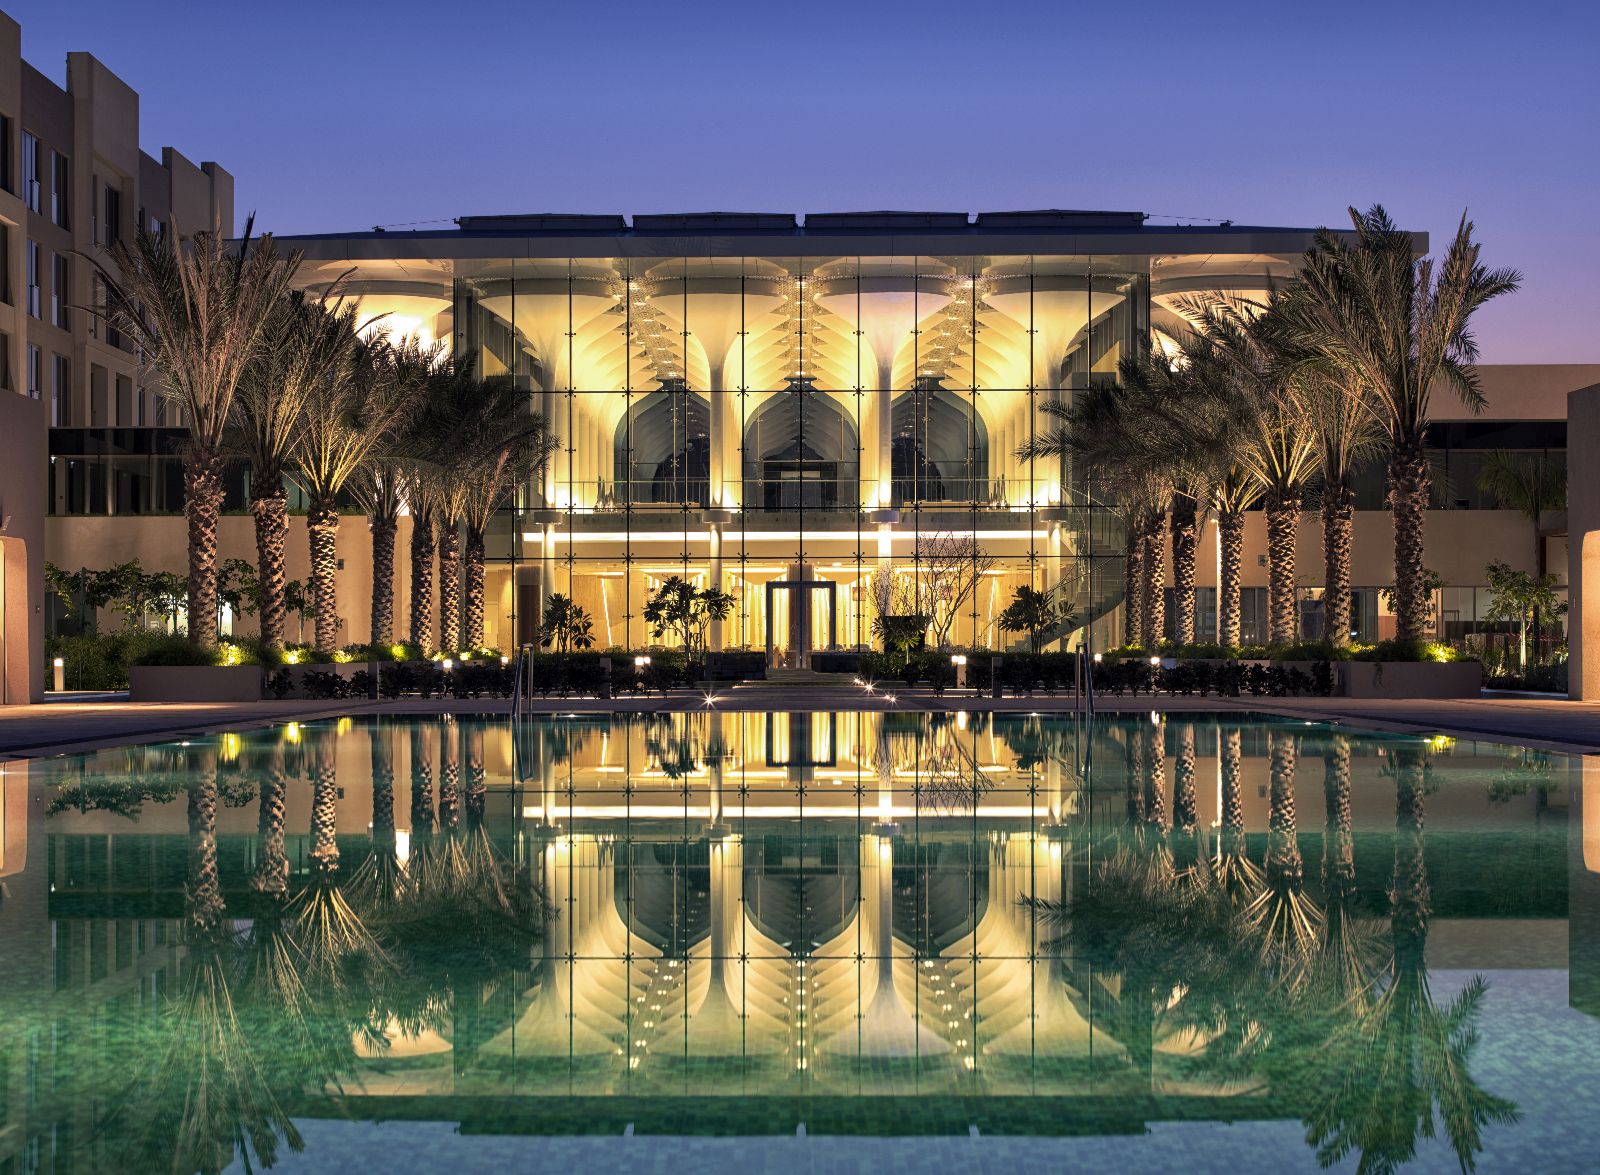 Exterior and lobby of the Kempinski Hotel Muscat in Oman